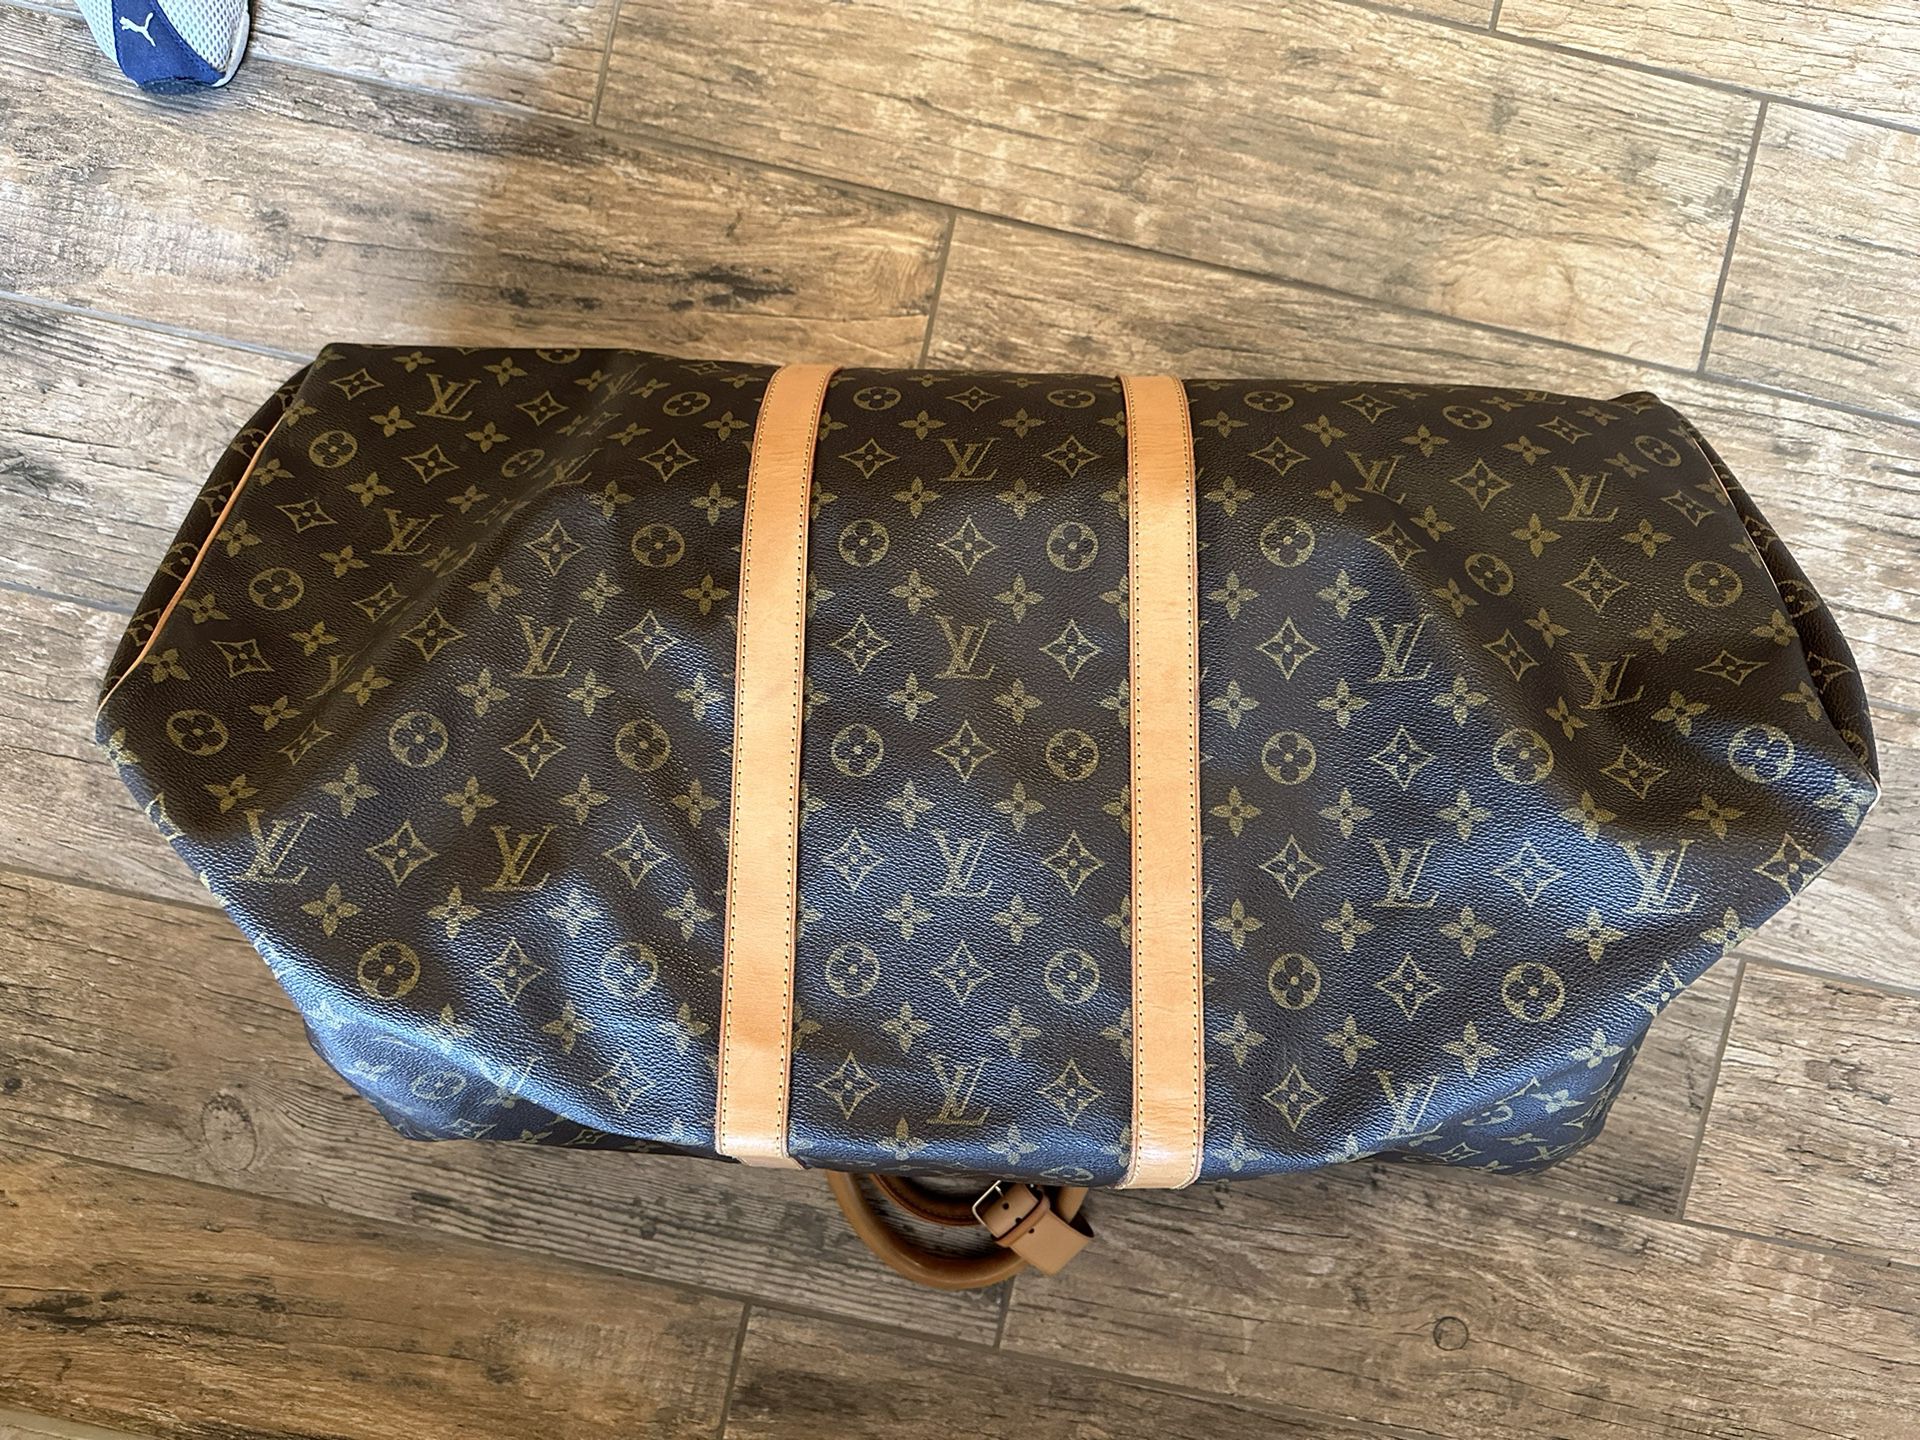 Louis Vuitton Vintage Carry On Duffle Bag. 24 “ Long , Comes With Lock And  KeyLong for Sale in Las Vegas, NV - OfferUp